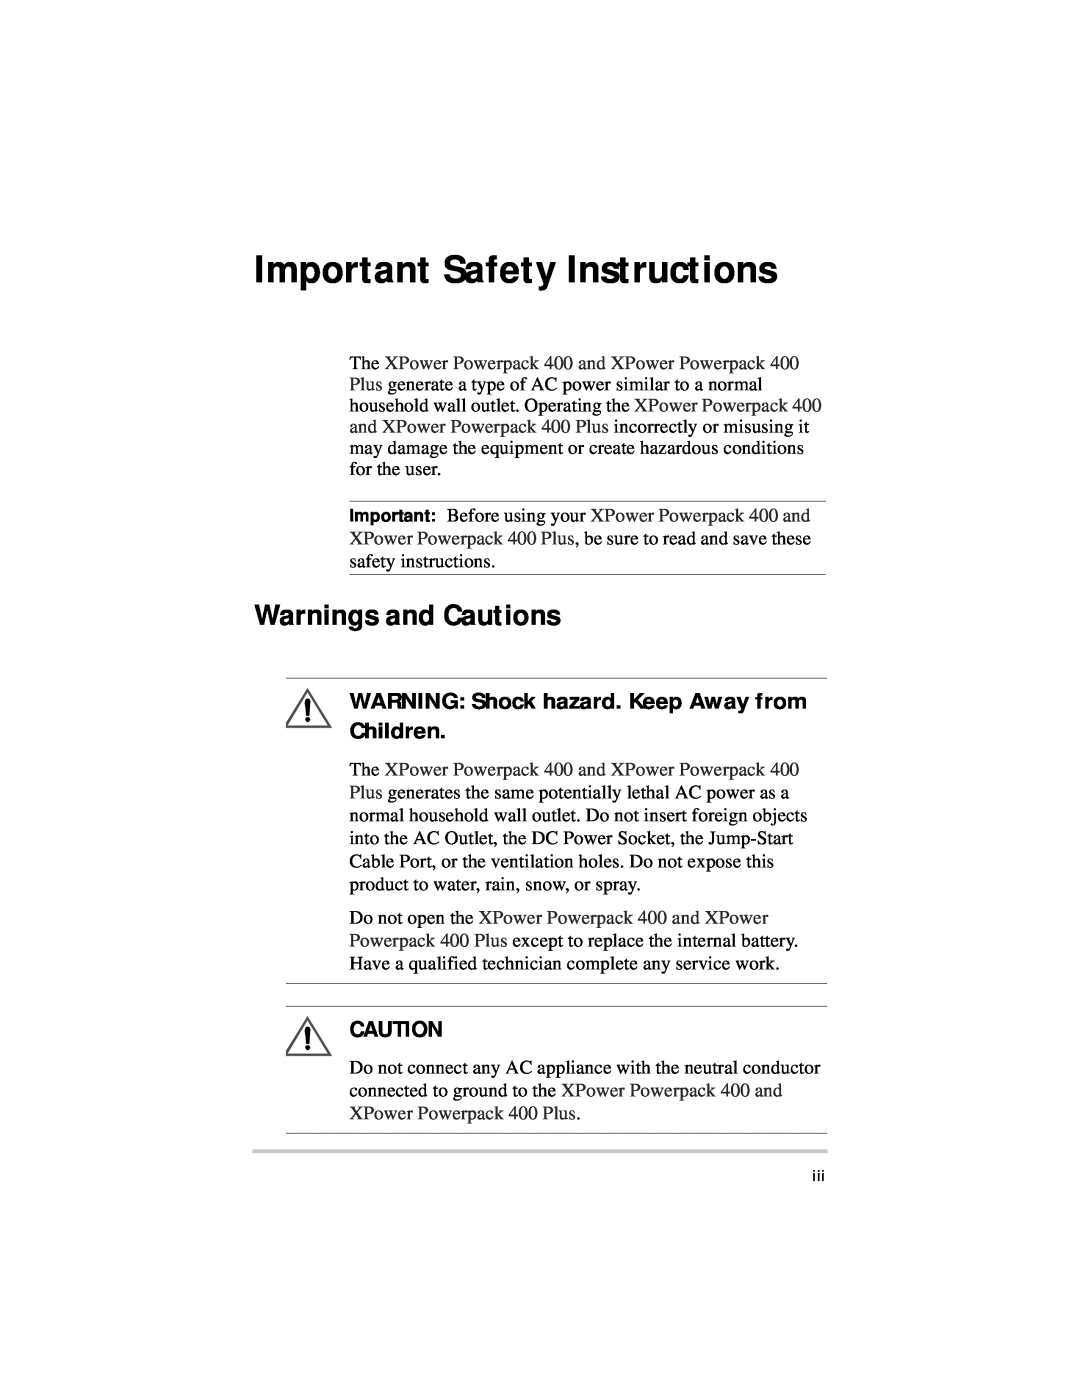 Xantrex Technology 975-0057-01-01 warranty Important Safety Instructions, Warnings and Cautions 